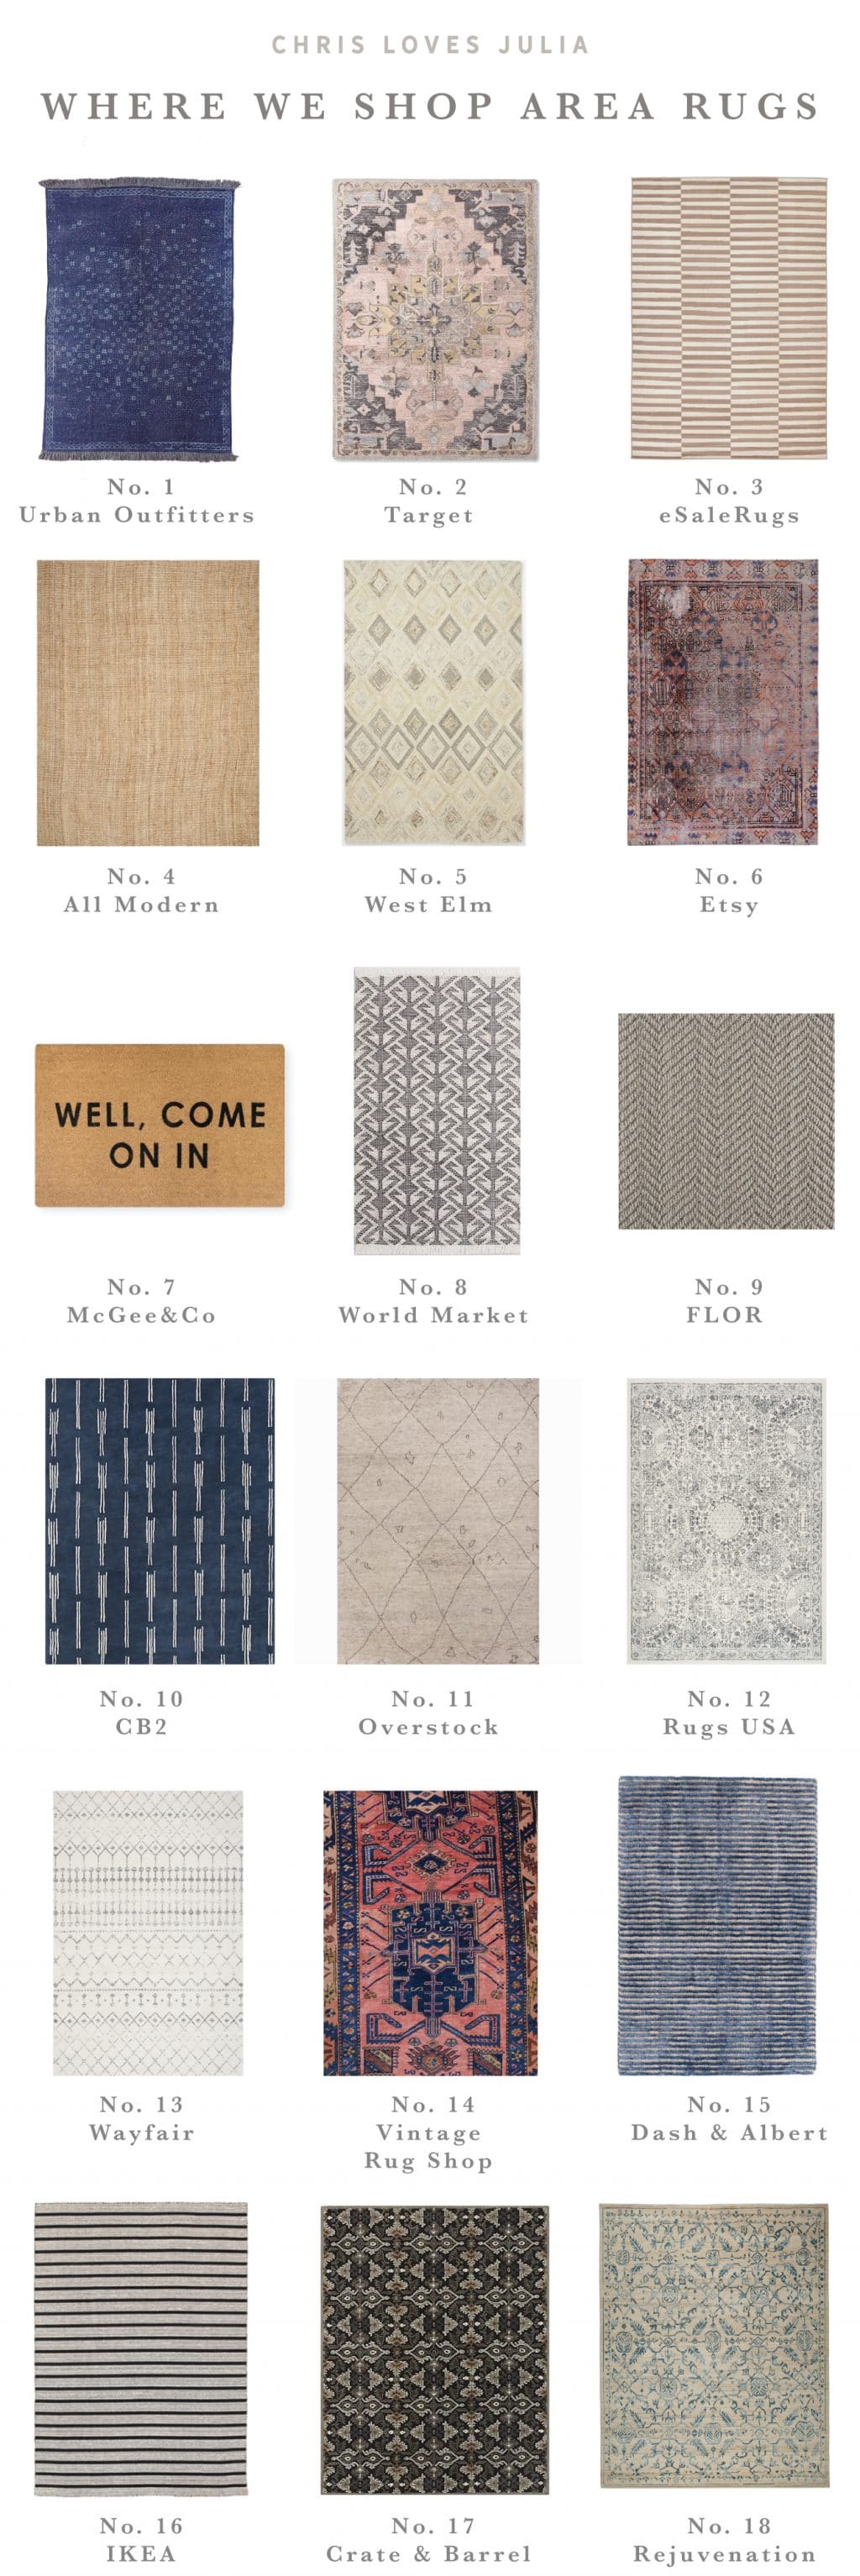 Our Favorite Places To Shop For Area Rugs Chris Loves Julia